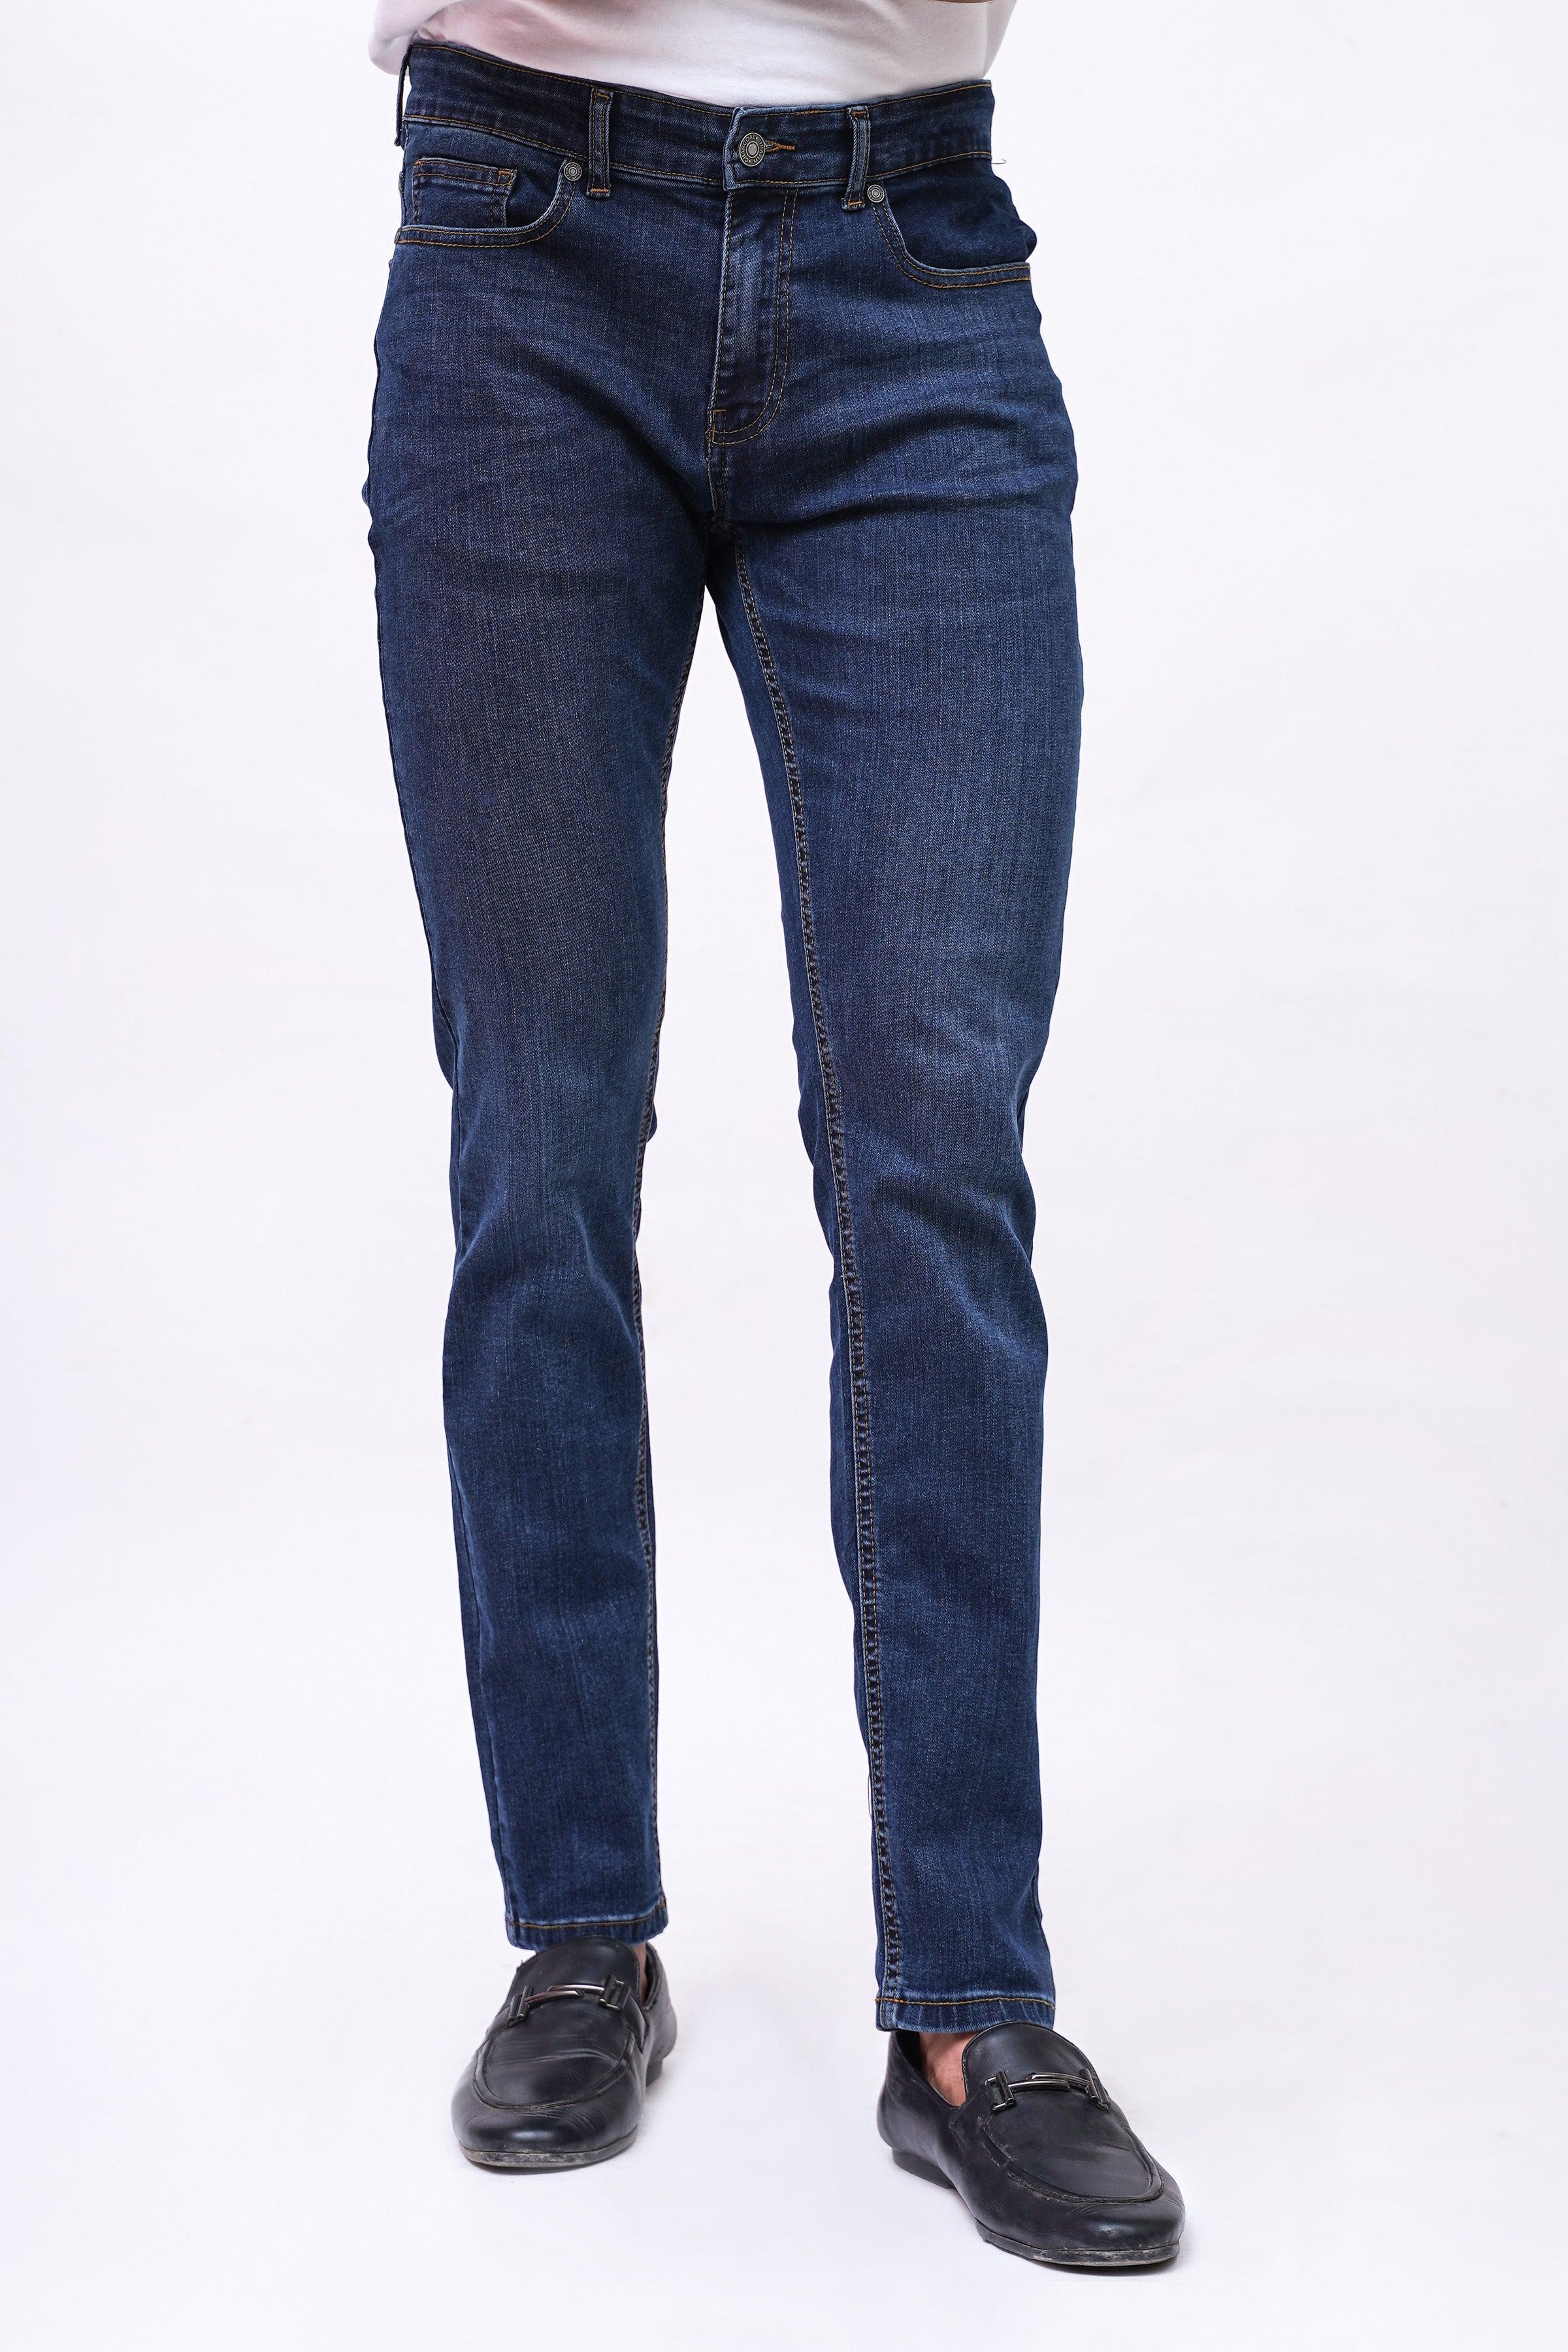 SLIM FIT BLUE TINTED JEAN at Charcoal Clothing